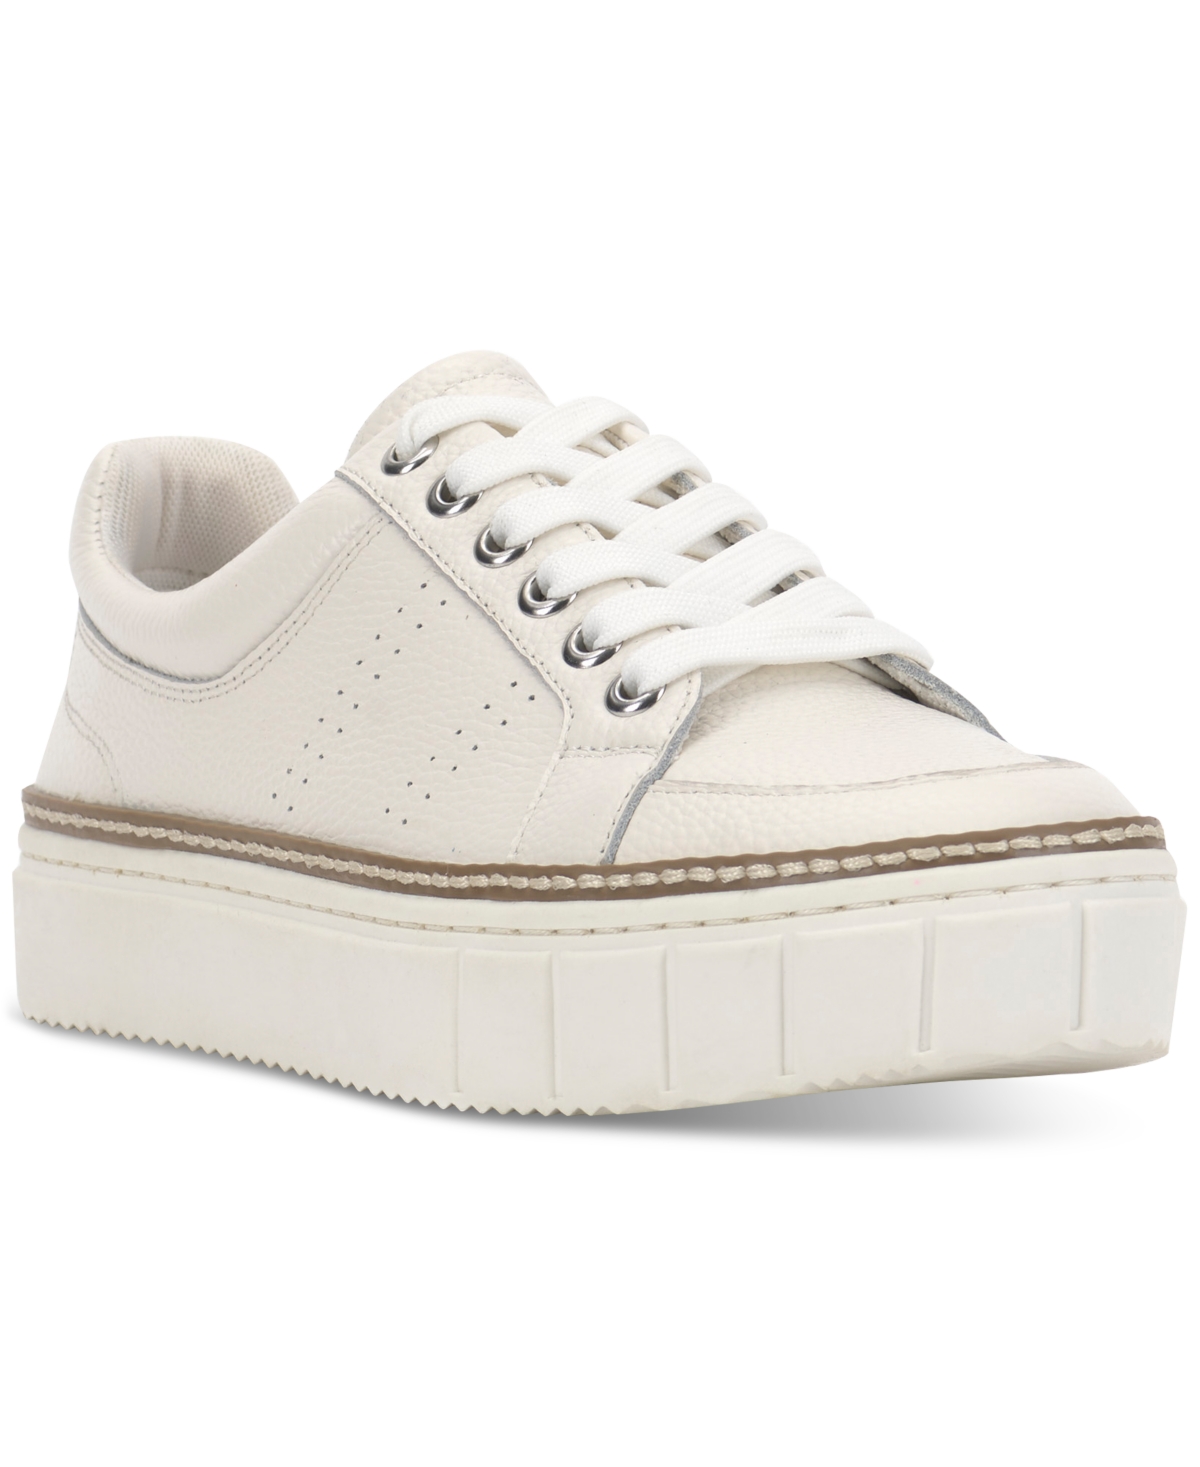 Women's Randay Lace-Up Platform Sneakers - Bright White